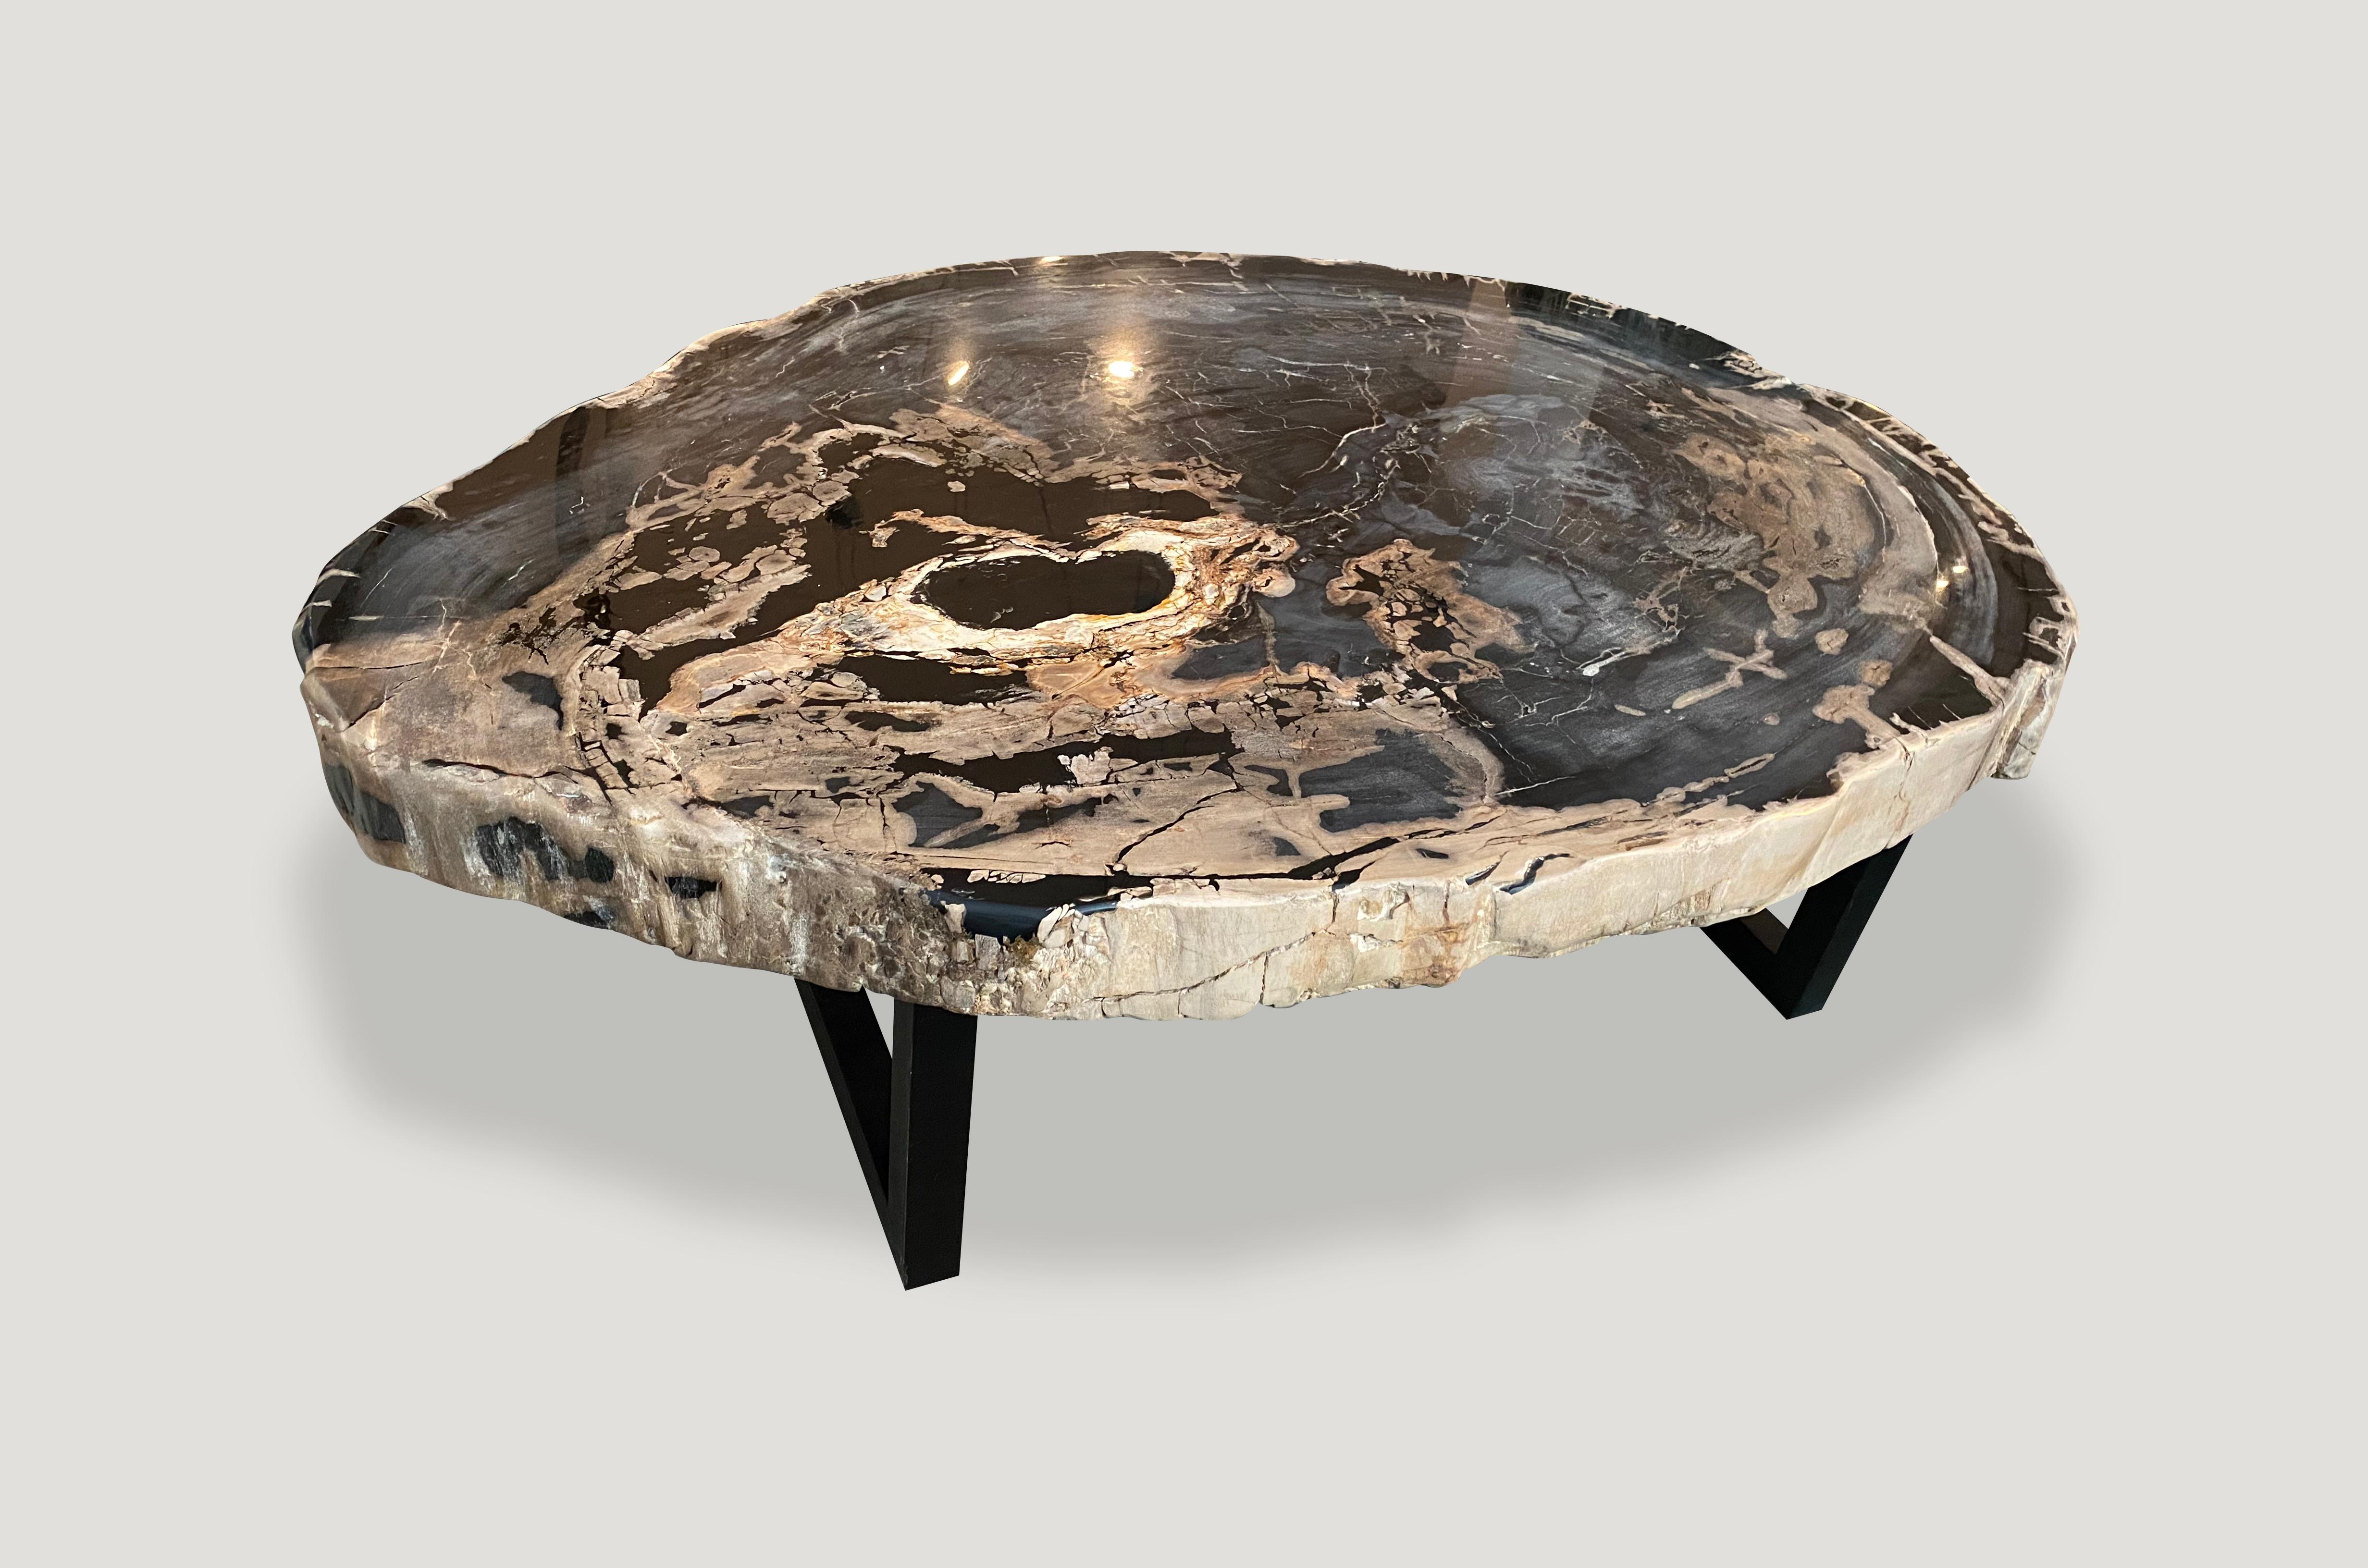 It’s rare to find these black, grey and camel tones in a petrified log. We have a pair cut from the same petrified log. Both super smooth and high quality. Shown with a black metal base. The price reflects one.

As with a diamond, we polish the